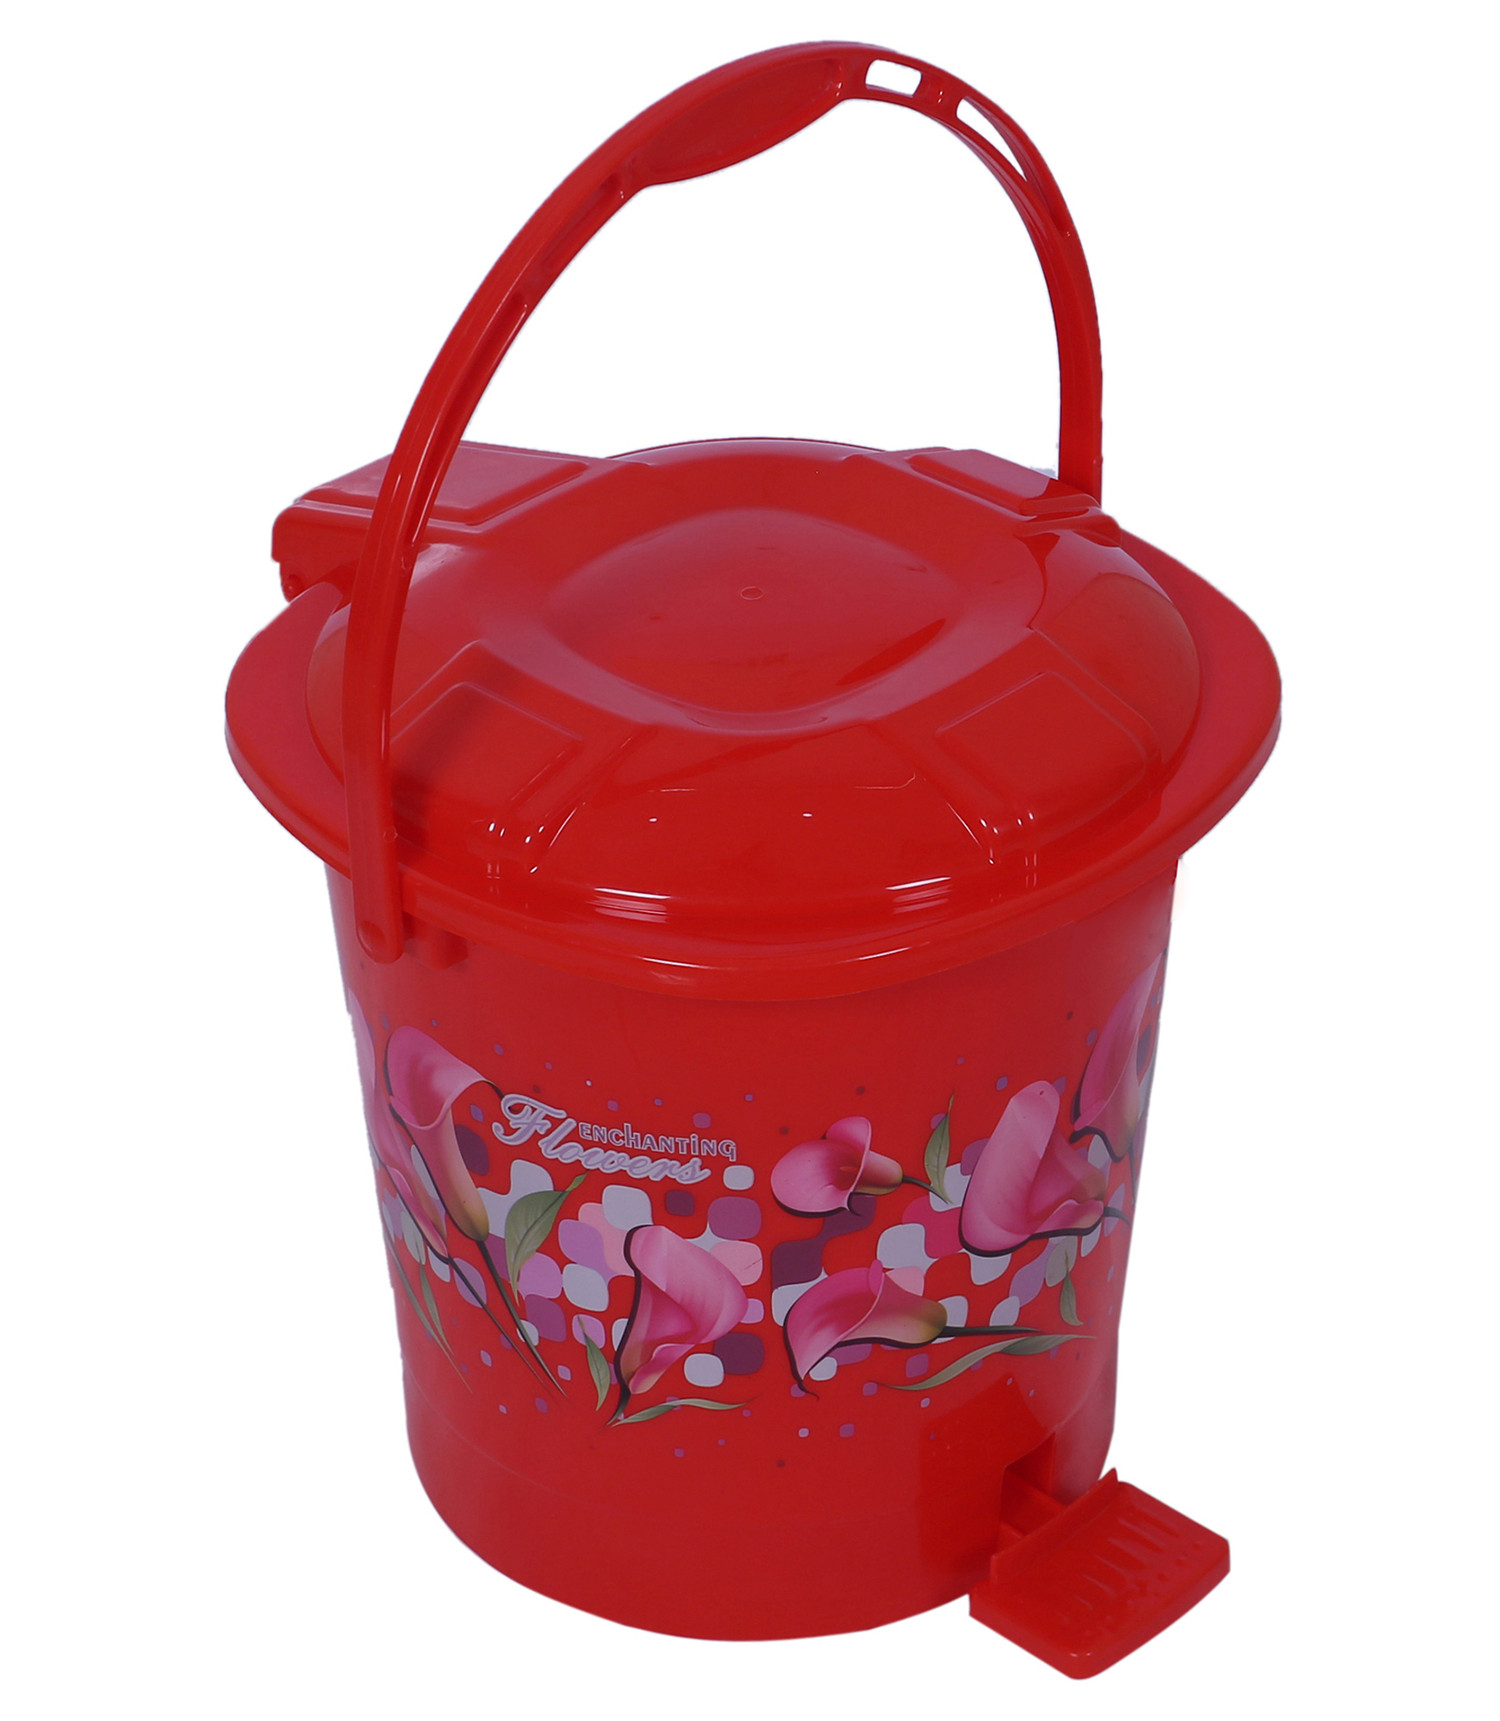 Kuber Industries Durable Flower Print Plastic Pedal Dustbin|Waste Bin|Trash Can For Kitchen & Home With Handle,7 Litre (Red)